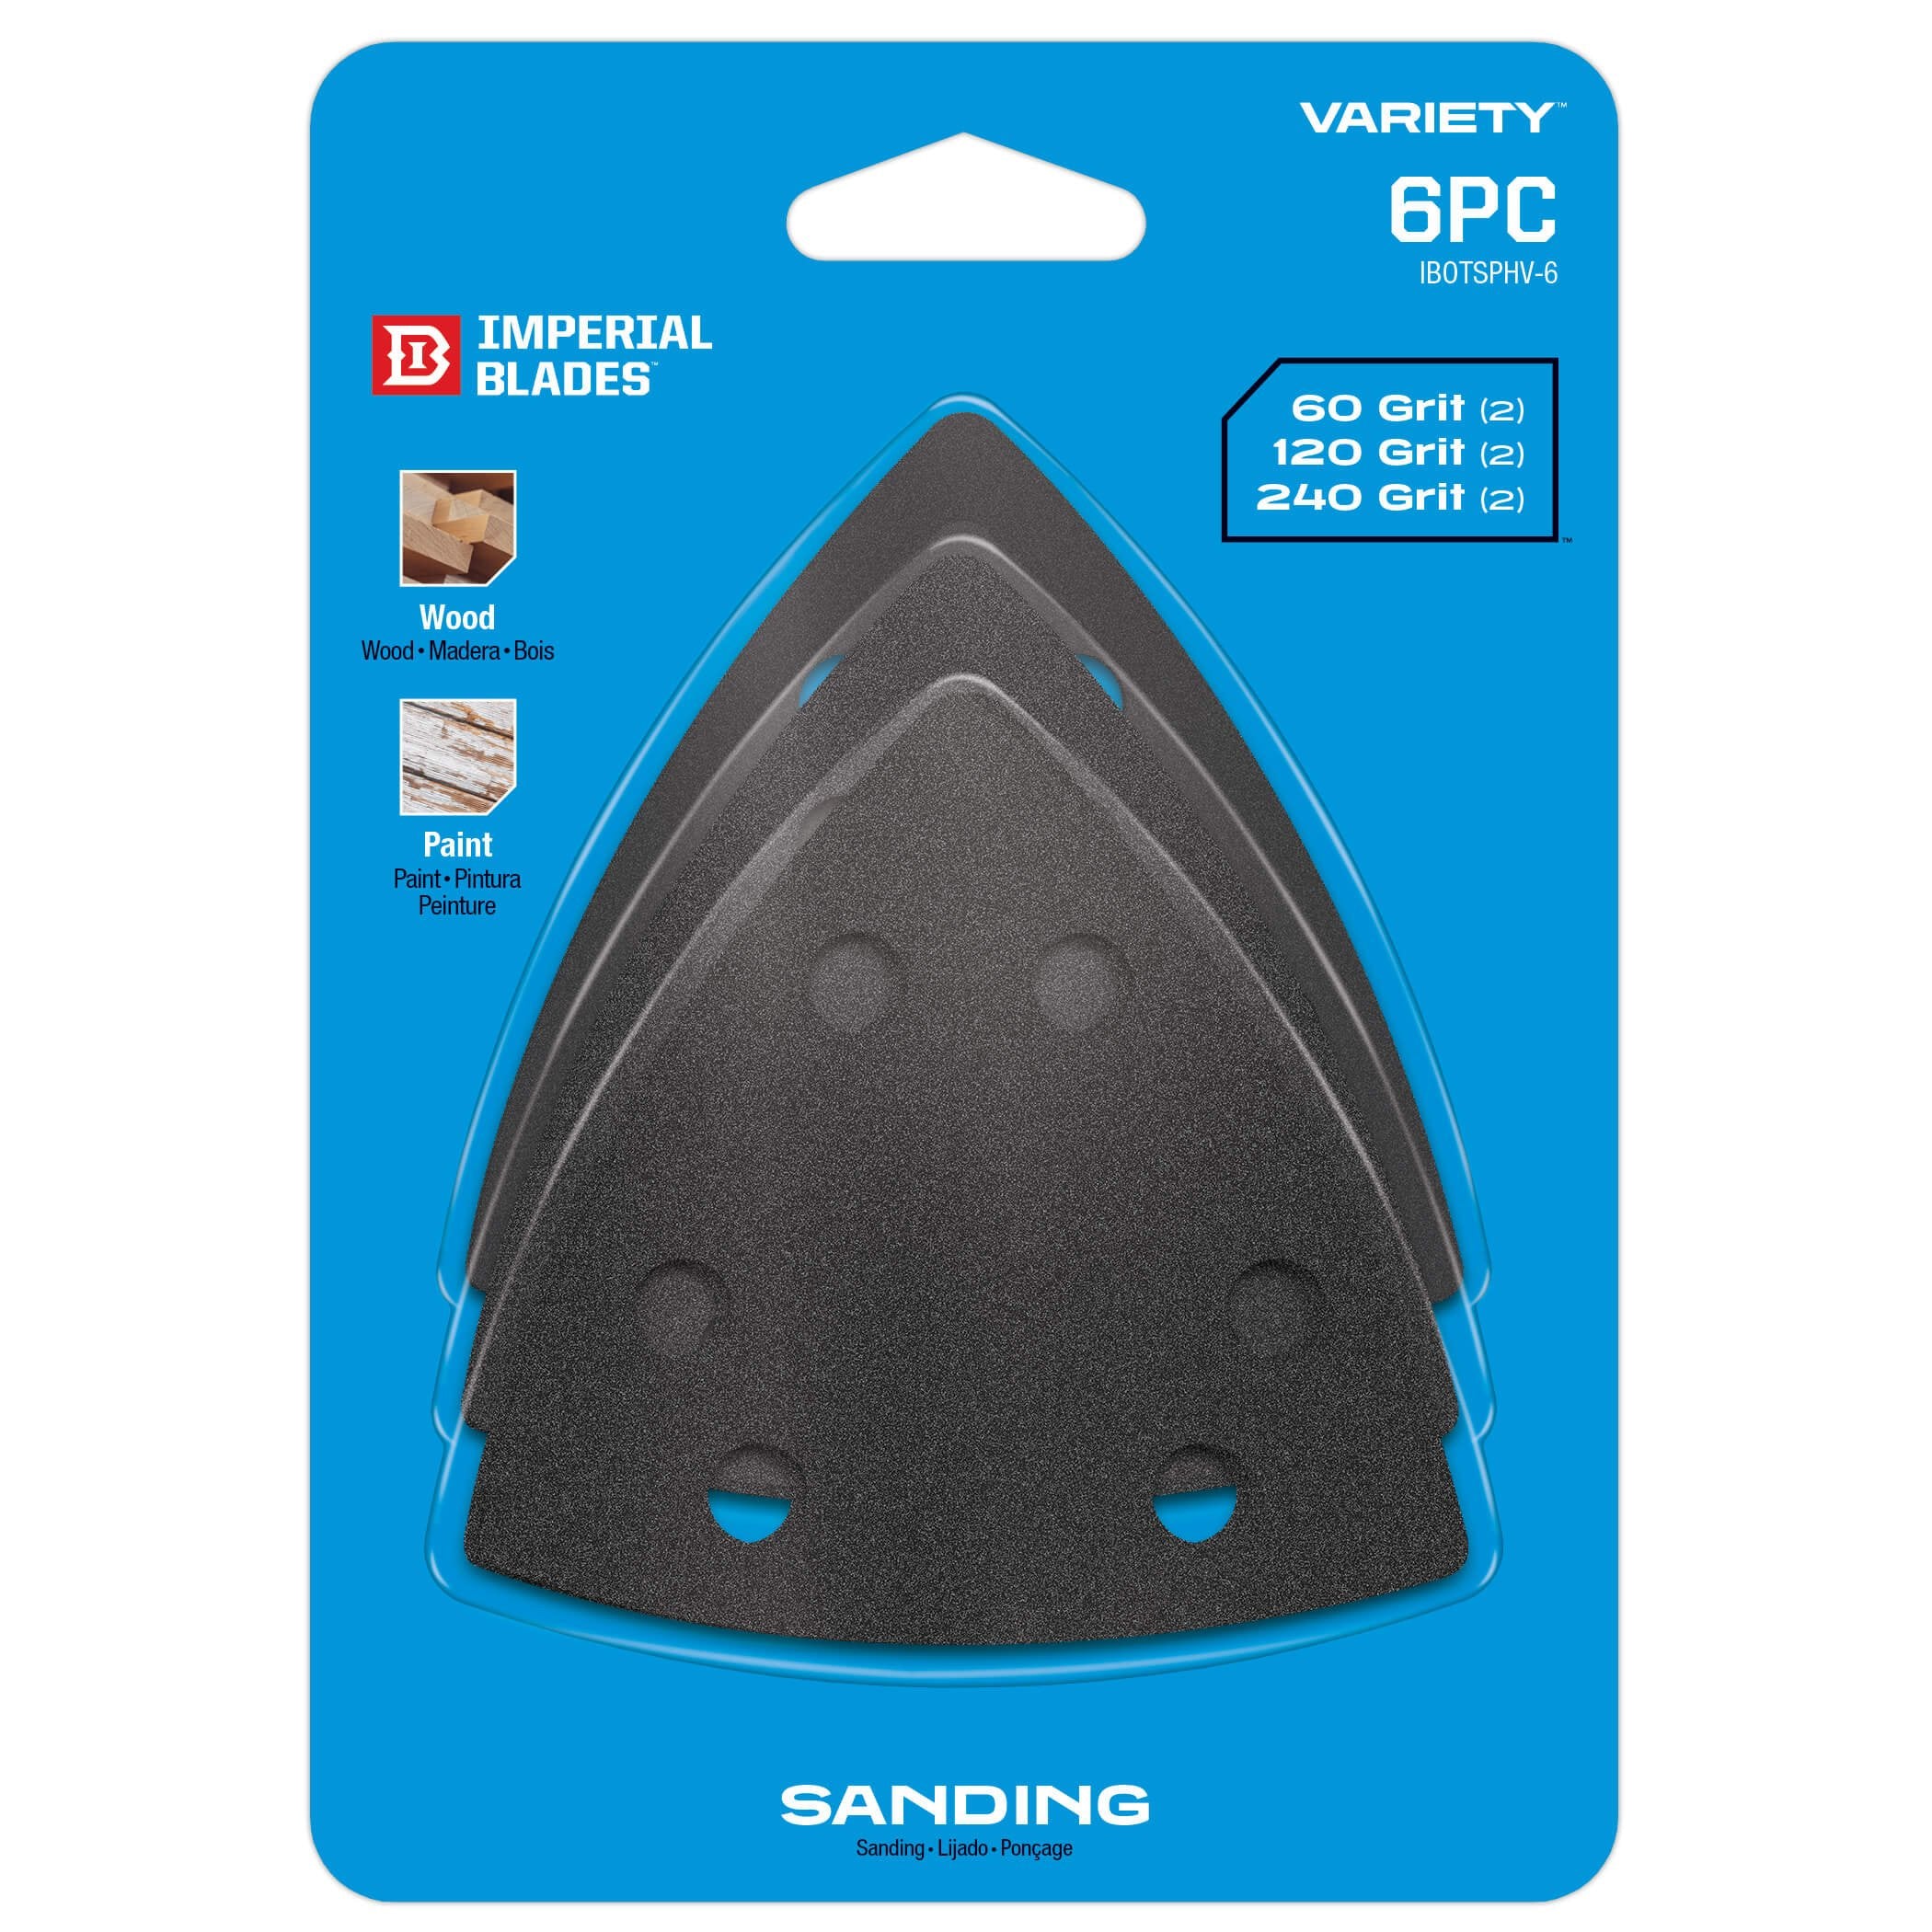 Imperial IBOTSPHV-6 -6pc Variety Pack Triangle Oscillating Sandpaper